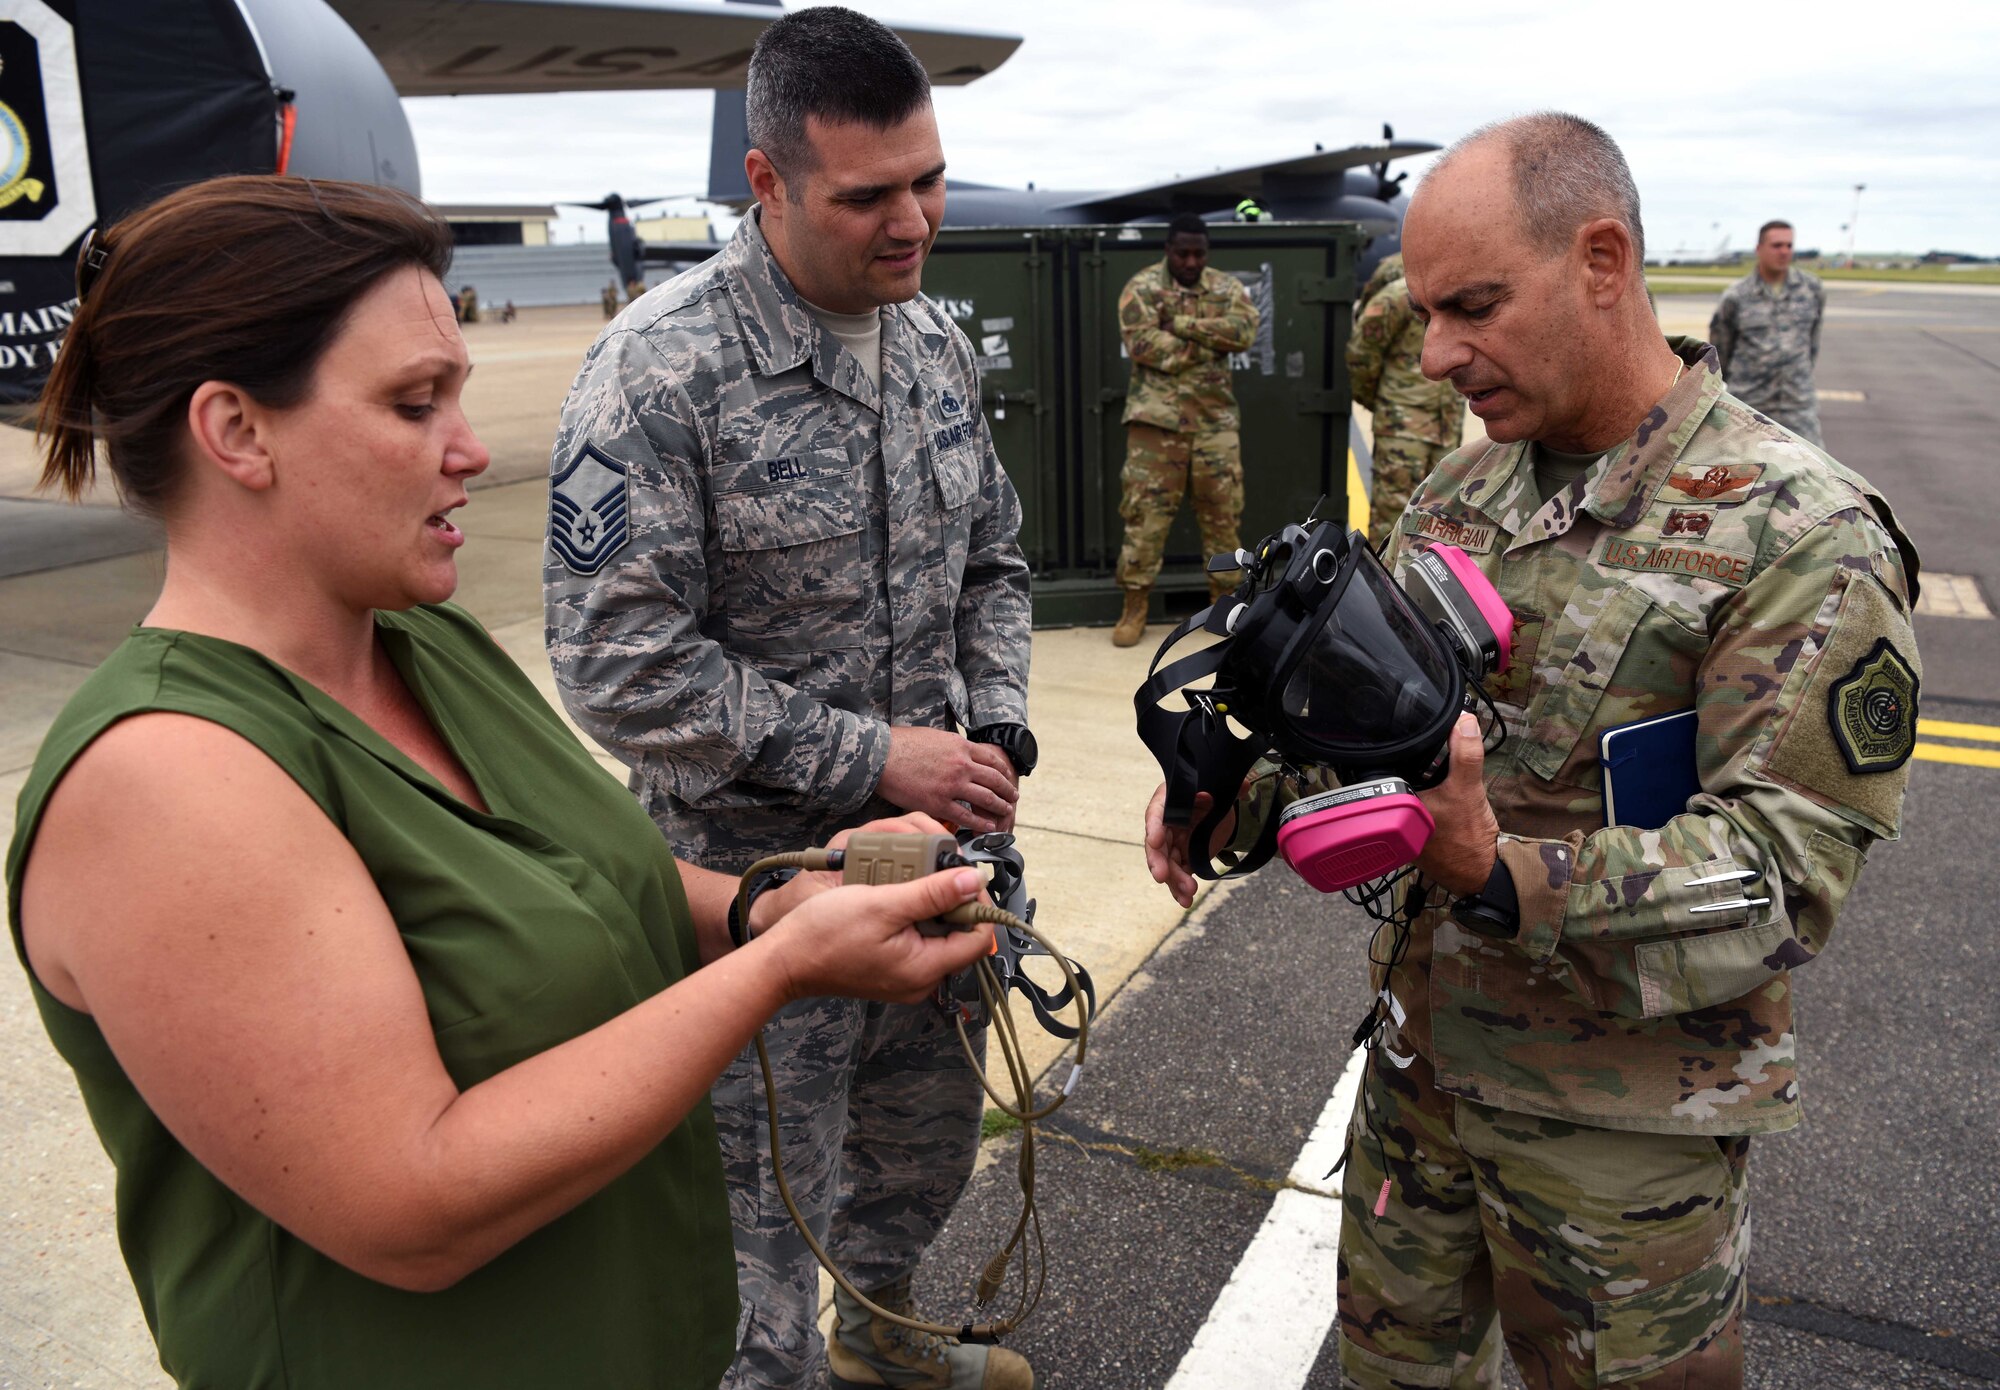 U.S. Air Force Gen. Jeff Harrigian, U.S. Air Forces in Europe – Air Forces Africa commander, is shown an Integrated Communication Respirator by Master Sgt. William Bell, 100th Maintenance Squadron accessories flight chief, and Mia Tobitt, 100th MXS Continuous Process Improvement manager, during a visit to RAF Mildenhall, England, July 15, 2019. During the visit, Harrigian stressed the importance of strengthening partnerships through various exercises and a shared, common goal. (U.S. Air Force photo by Airman 1st Class Brandon Esau)